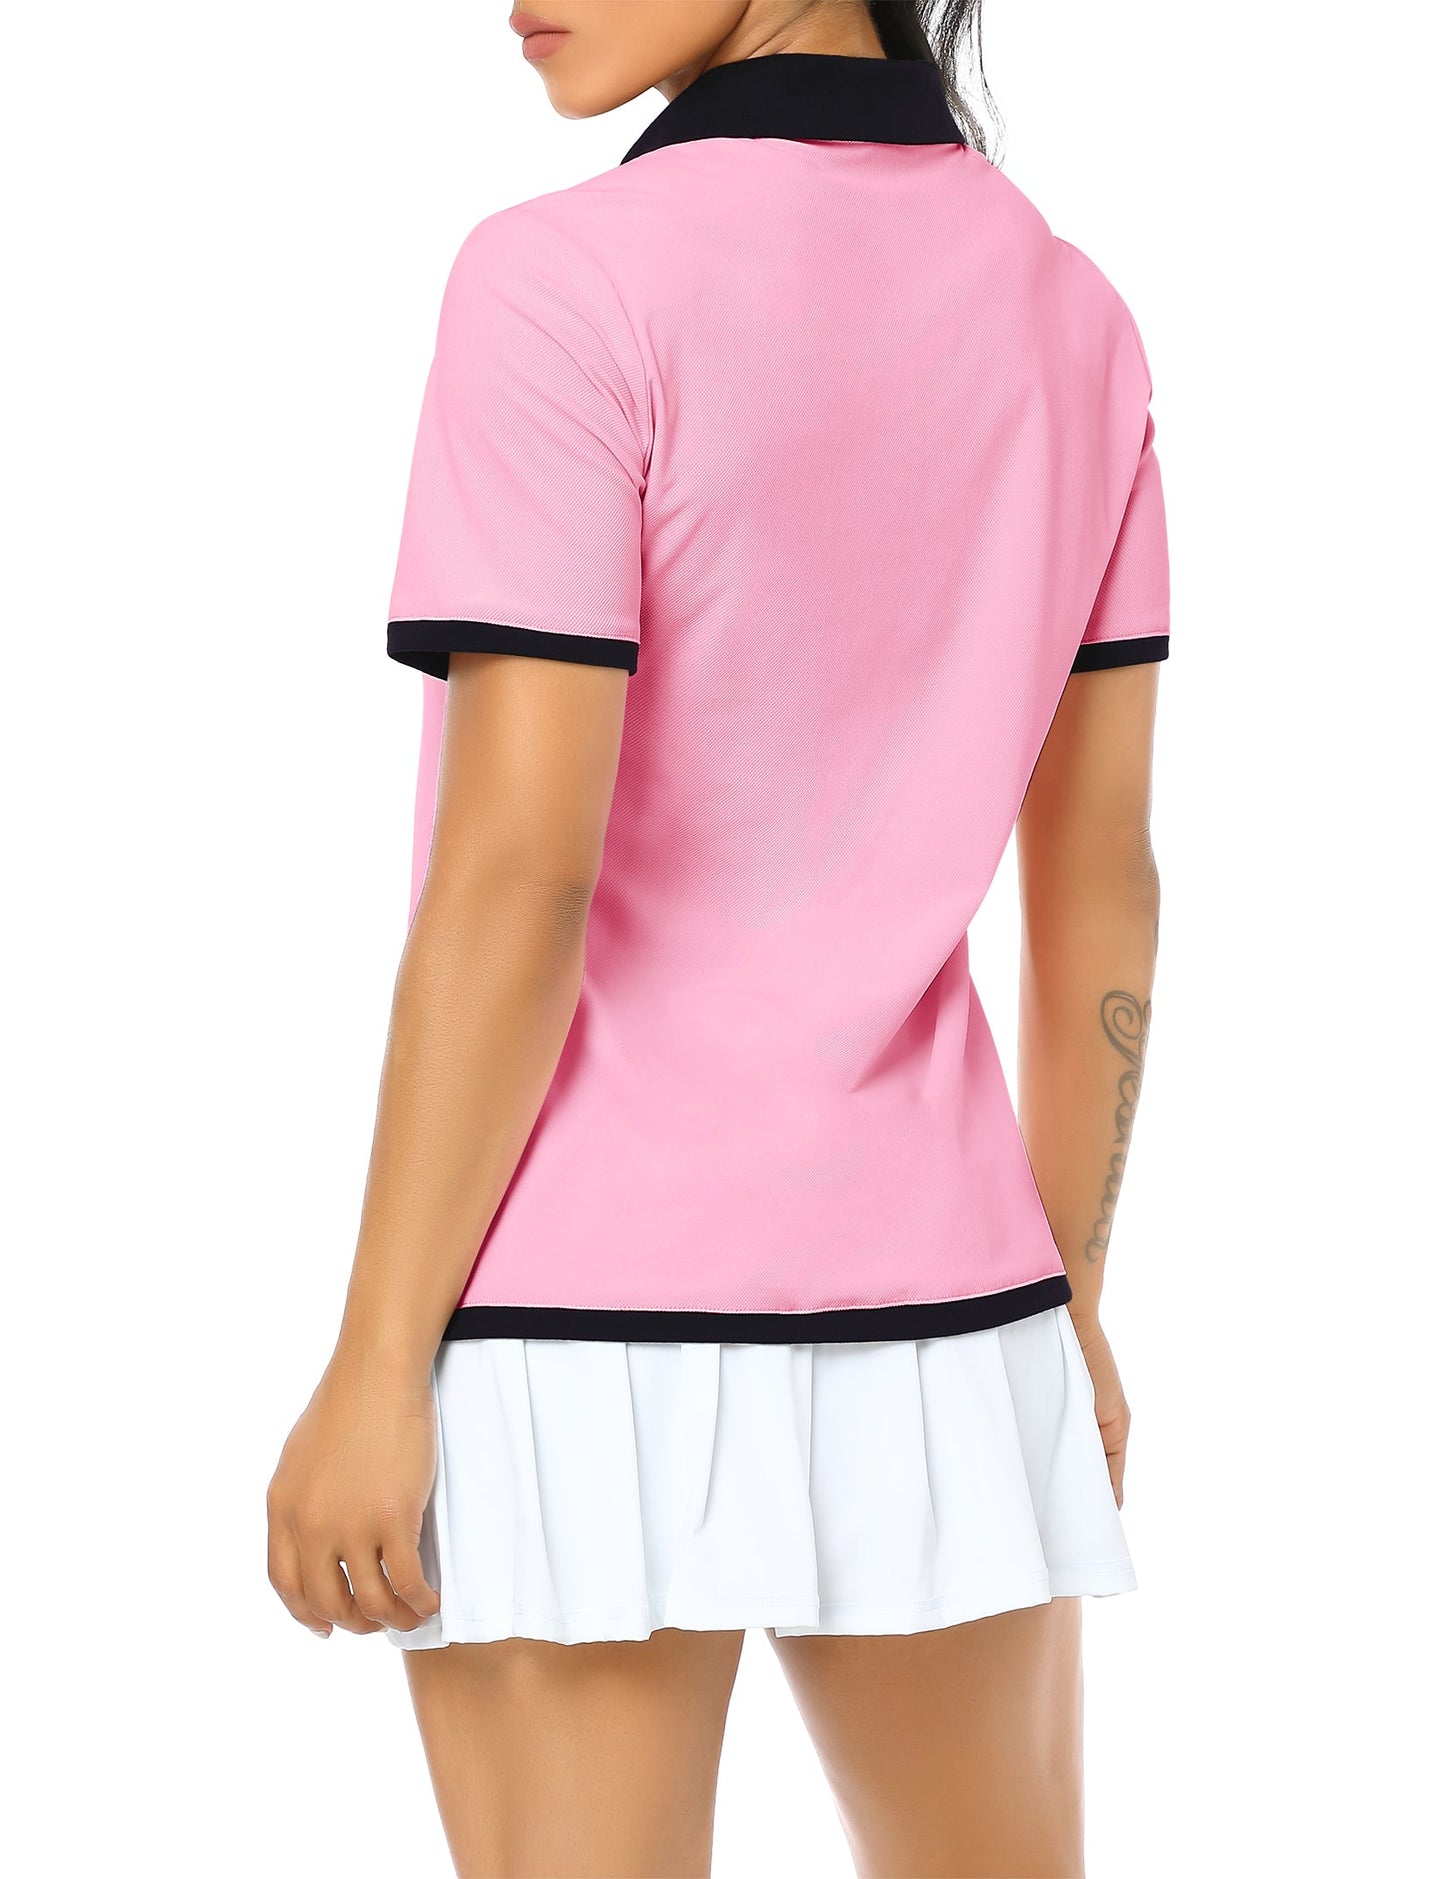 YESFASHION Polo Shirts for Women Golf Tops Pink